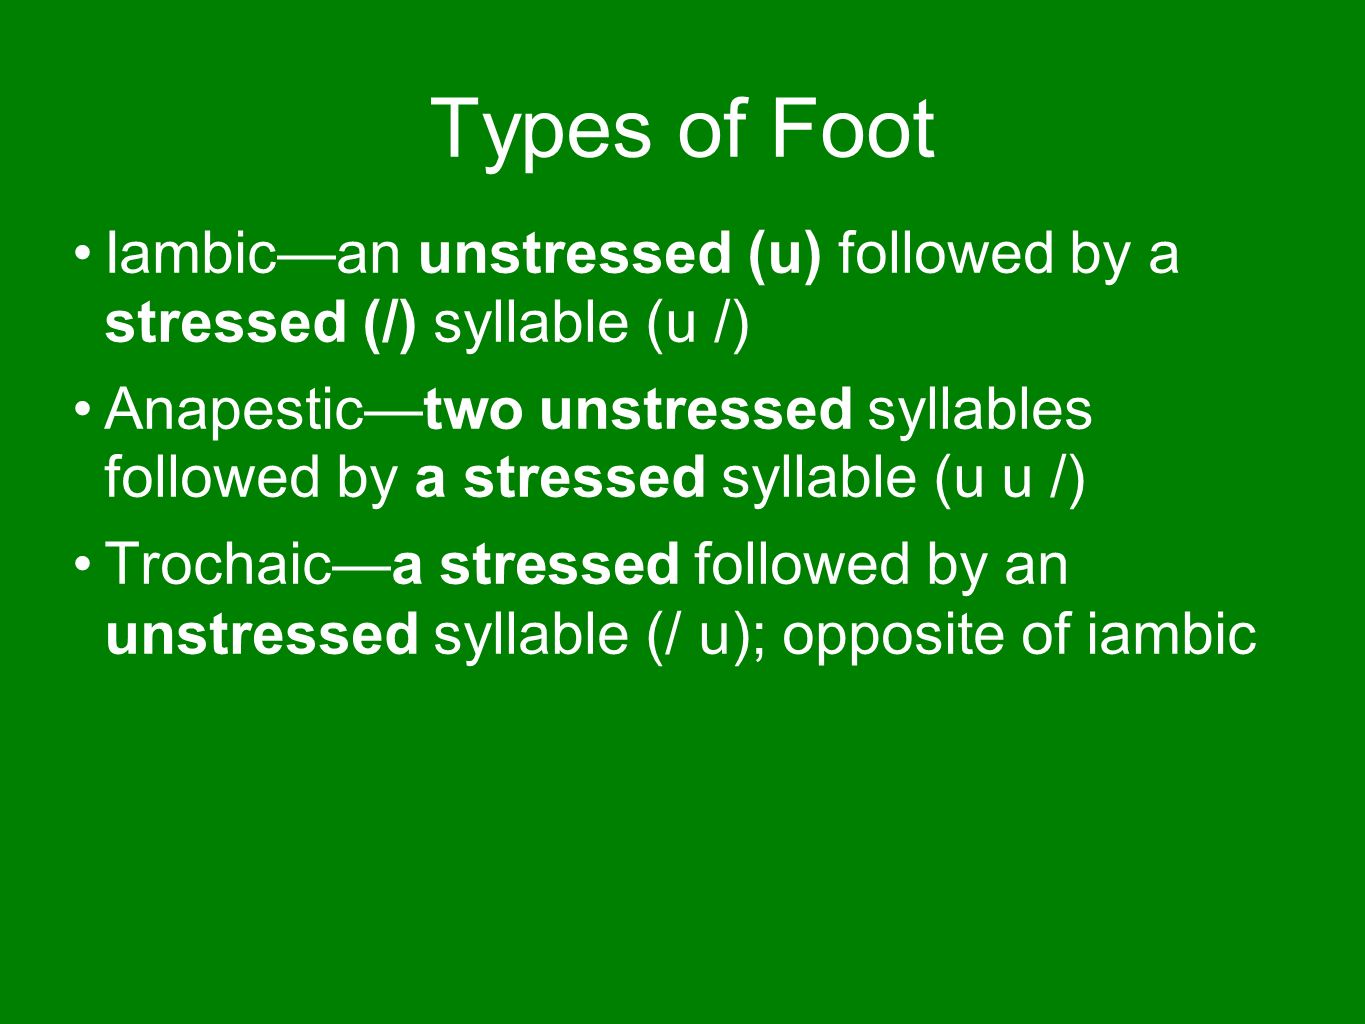 Types of Foot Iambic—an unstressed (u) followed by a stressed (/) syllable (u /) Anapestic—two unstressed syllables followed by a stressed syllable (u u /) Trochaic—a stressed followed by an unstressed syllable (/ u); opposite of iambic